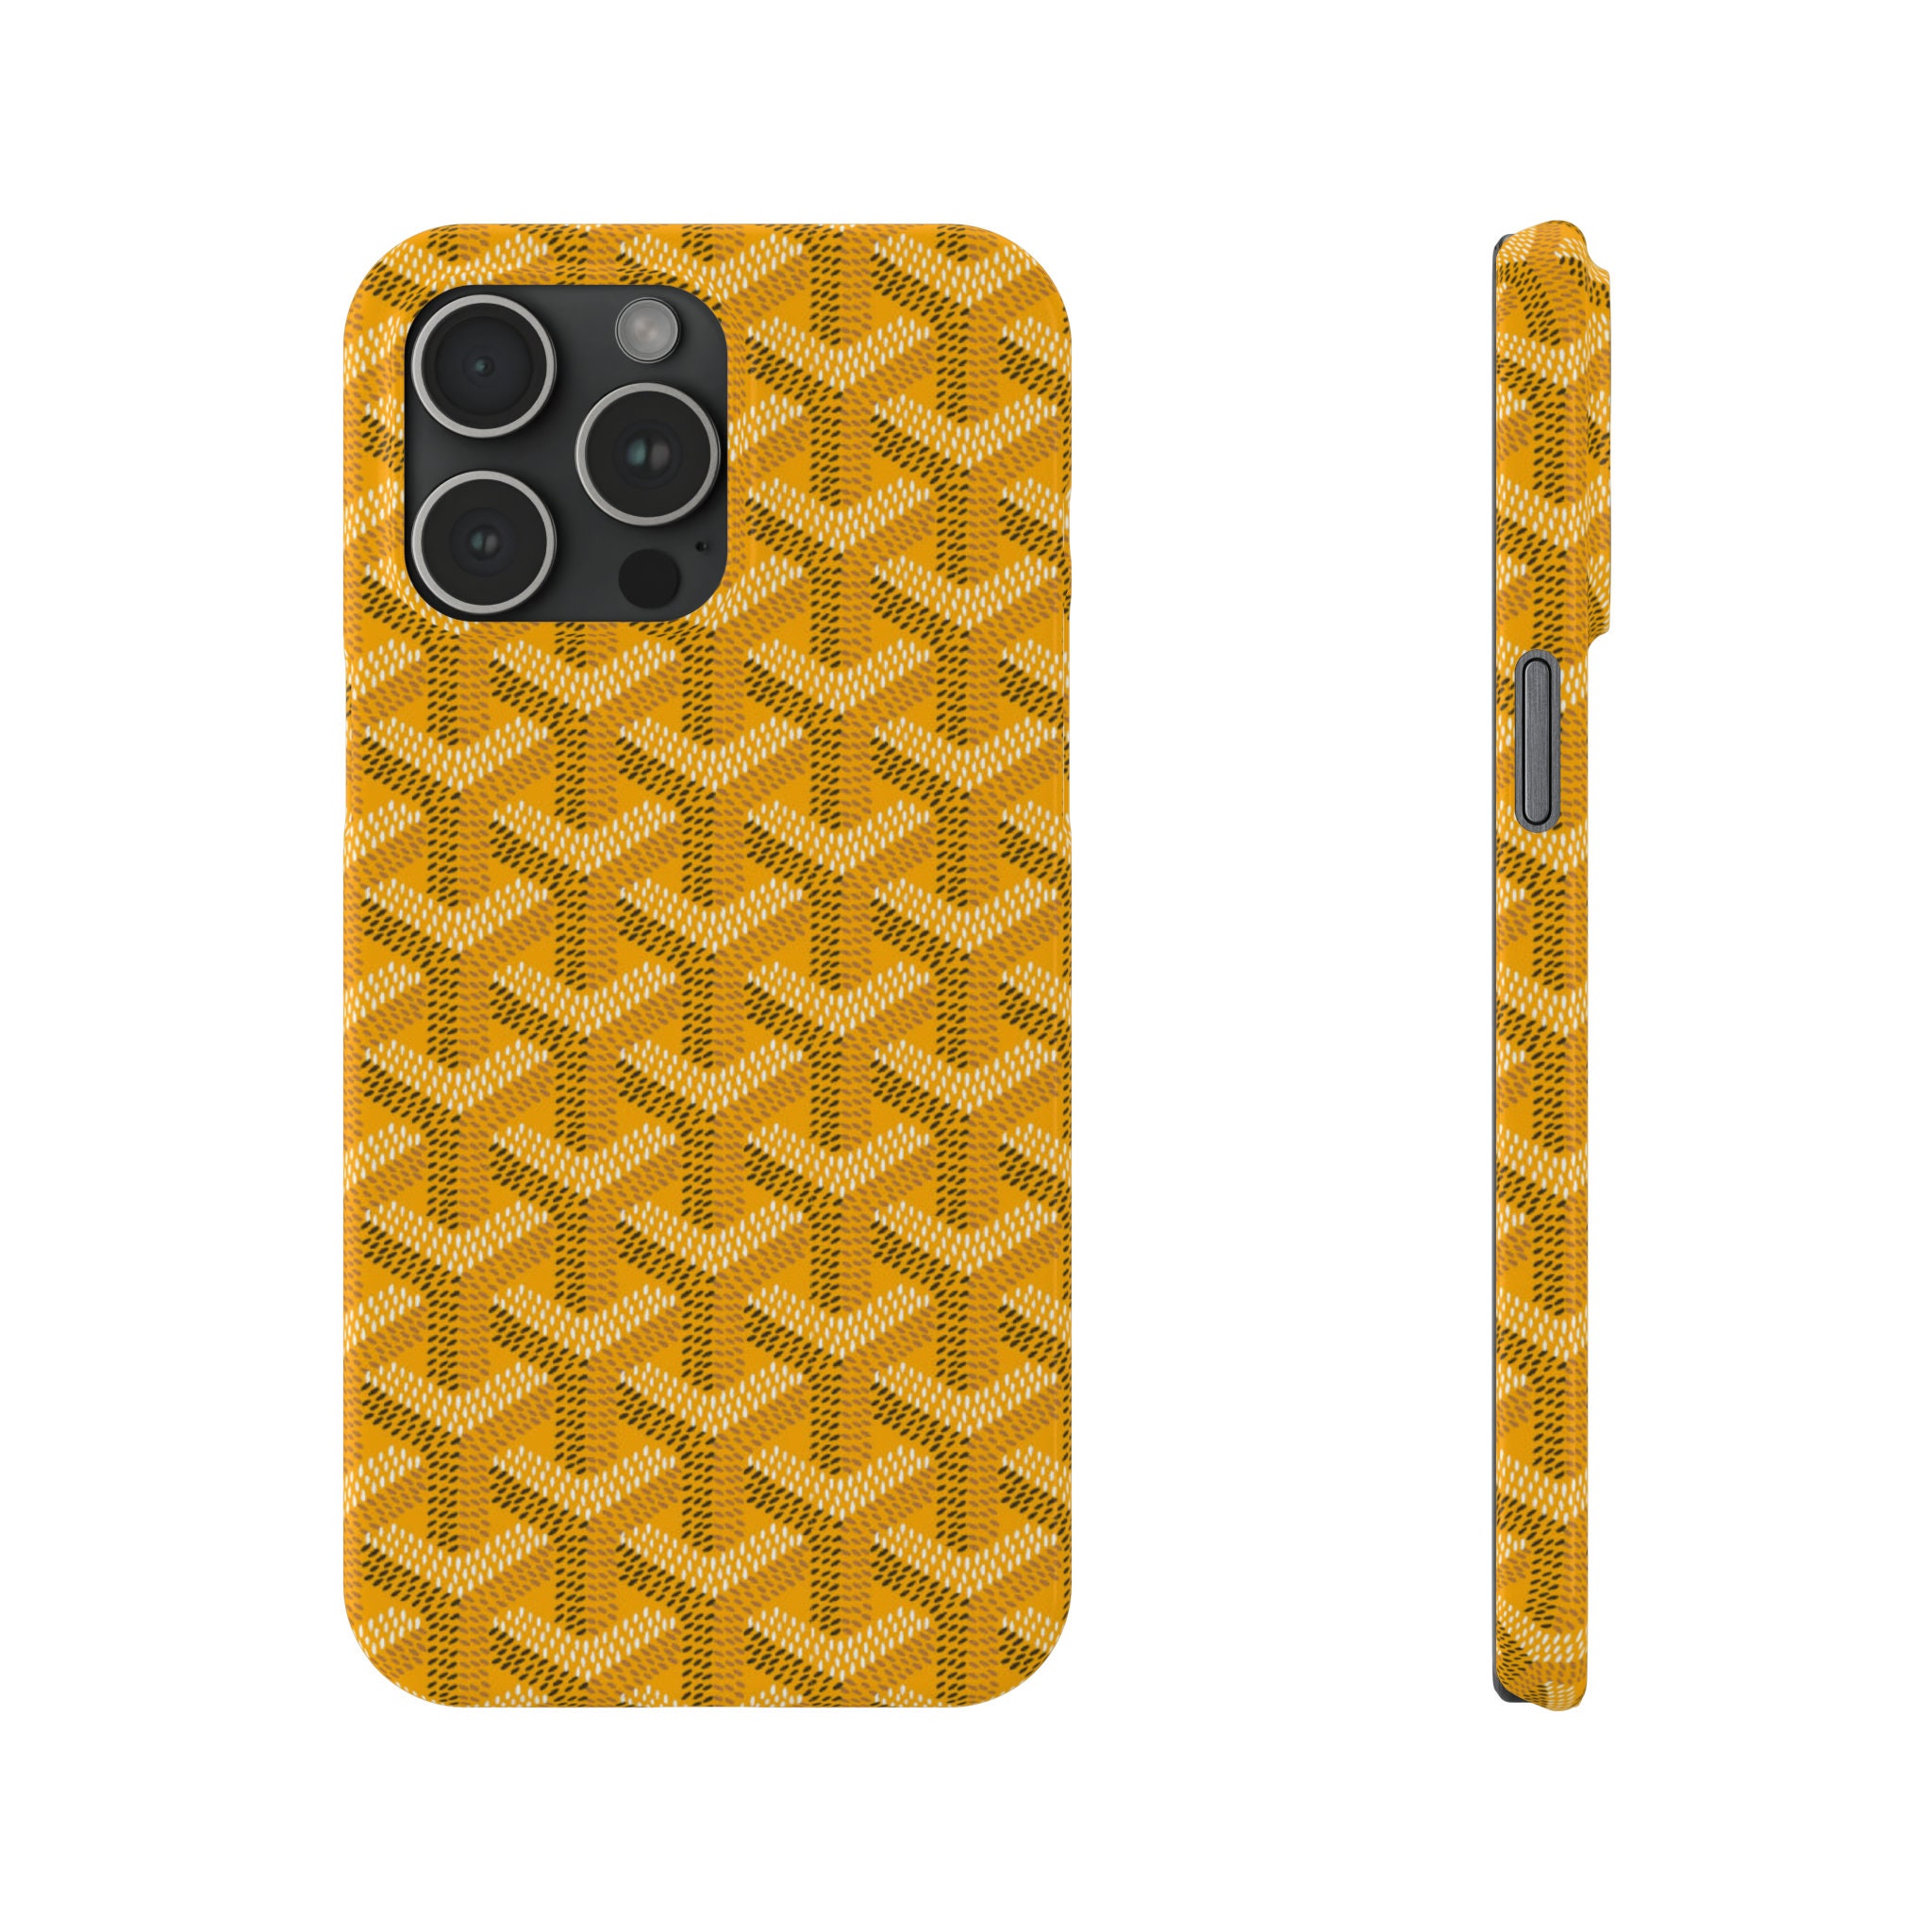 Cell Phones & Accessories, Goyard Iphone Xr Case